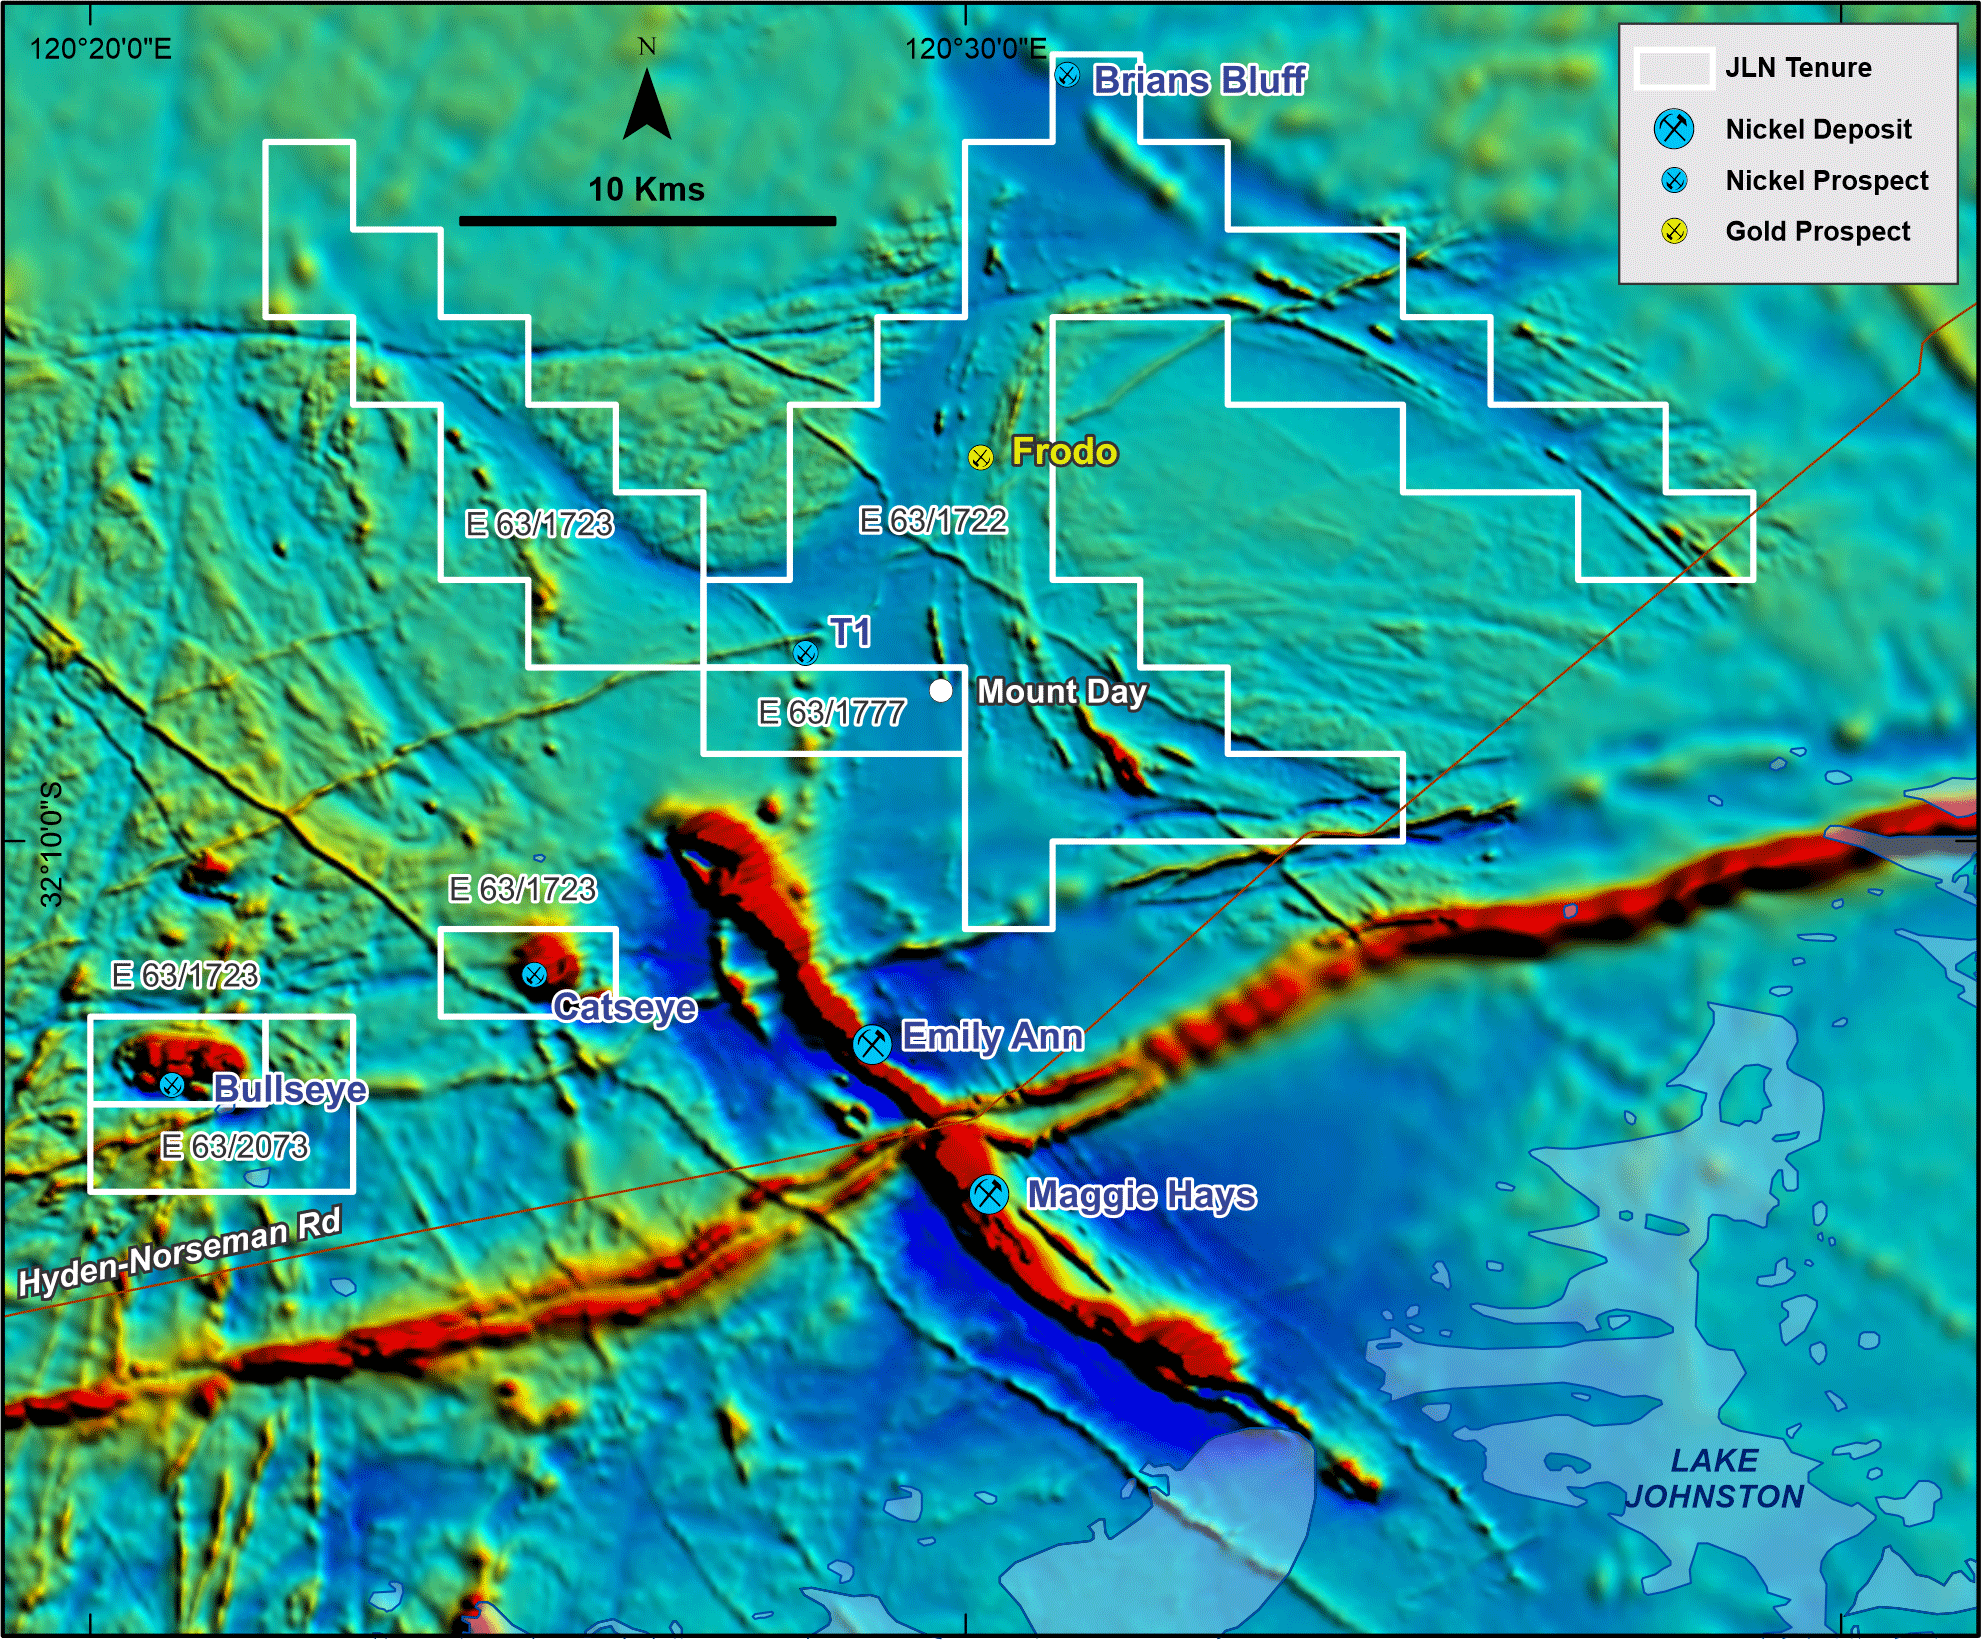 Lake Johnston Project – Tenement Location over Aeromagnetic Image - Click to enlarge